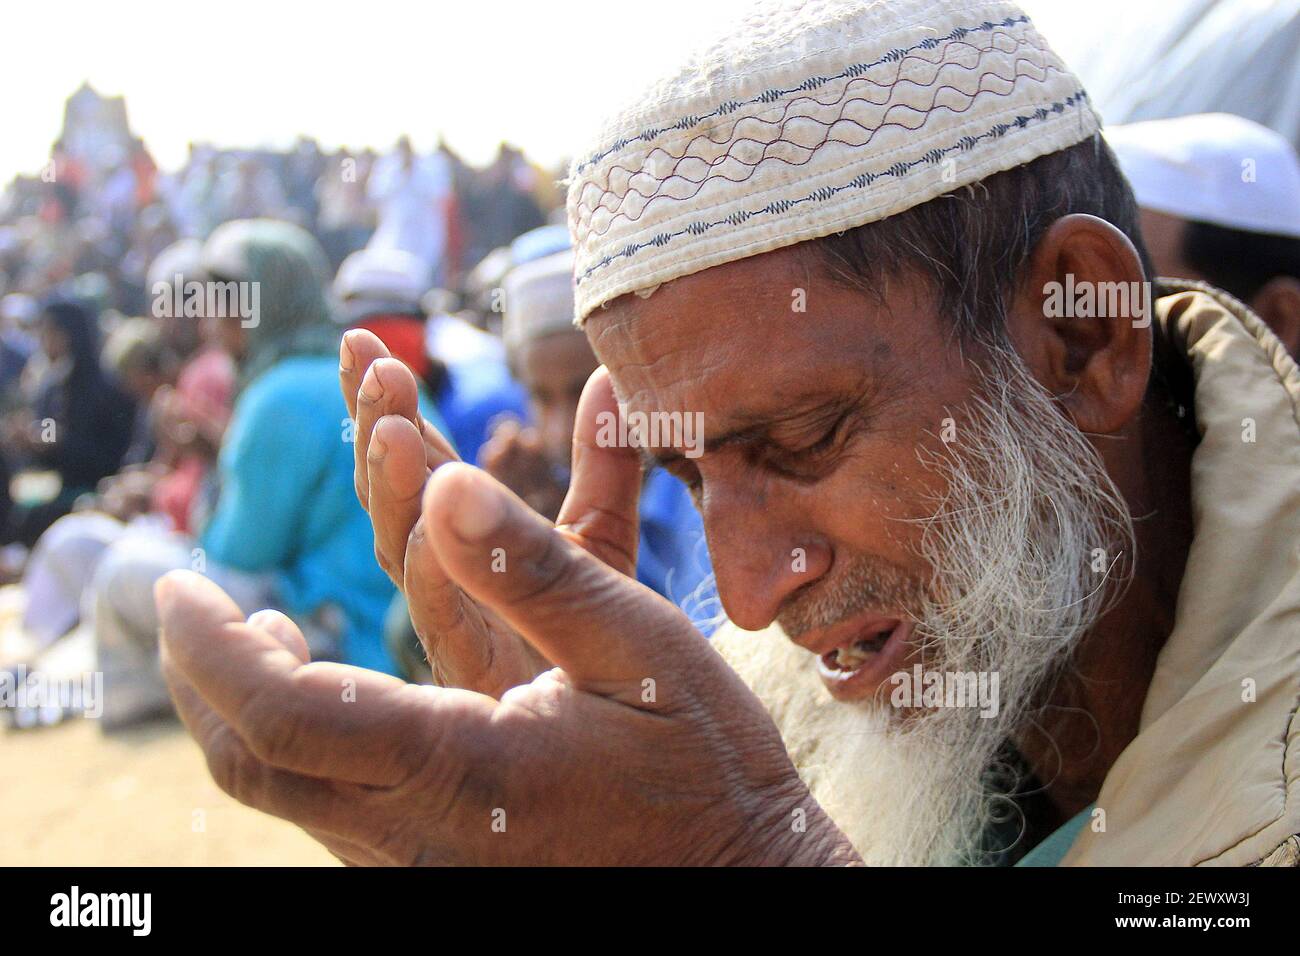 A Muslim participates in Akheri Munajat, or last prayers, at the conclusion of the Biswa Ijtema or World Muslim Congregation in Tongi, near Dhaka, Bangladesh on January 11, 2015. Muslims joined a prayer on the banks of a river in Bangladesh as the world's third largest annual Islamic congregation ended. (Photo by Palash Khan *** Please Use Credit from Credit Field *** Stock Photo